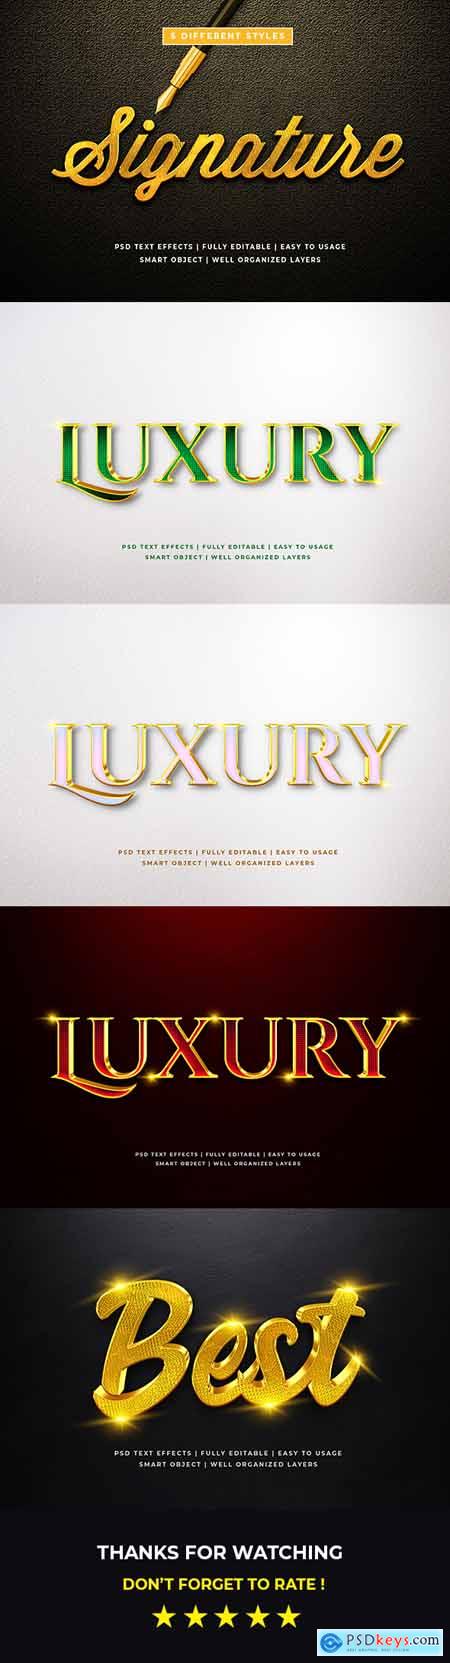 3d Luxury Text Style Effect Mockup 26054193